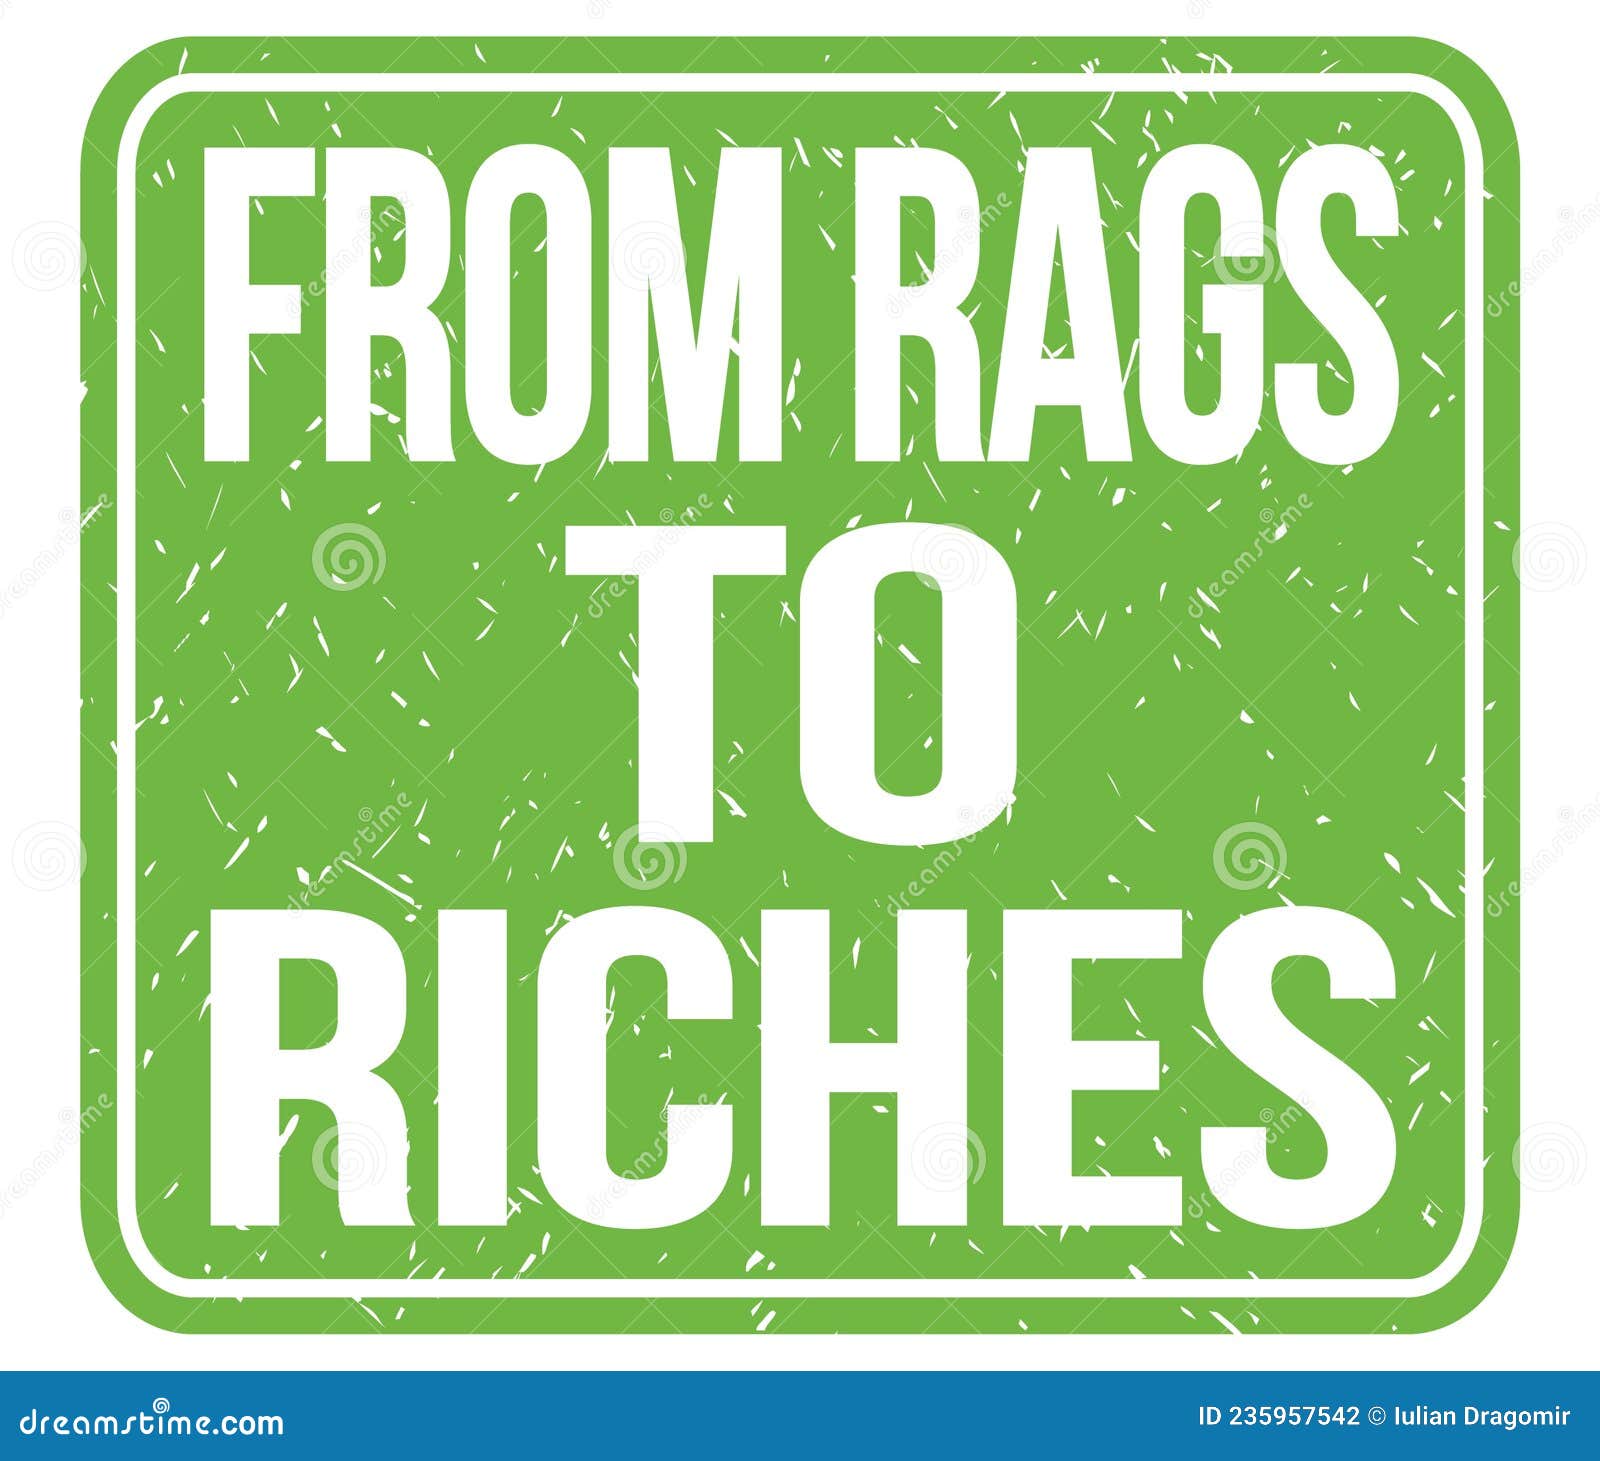 Rags To Riches Images – Browse 5,098 Stock Photos, Vectors, and